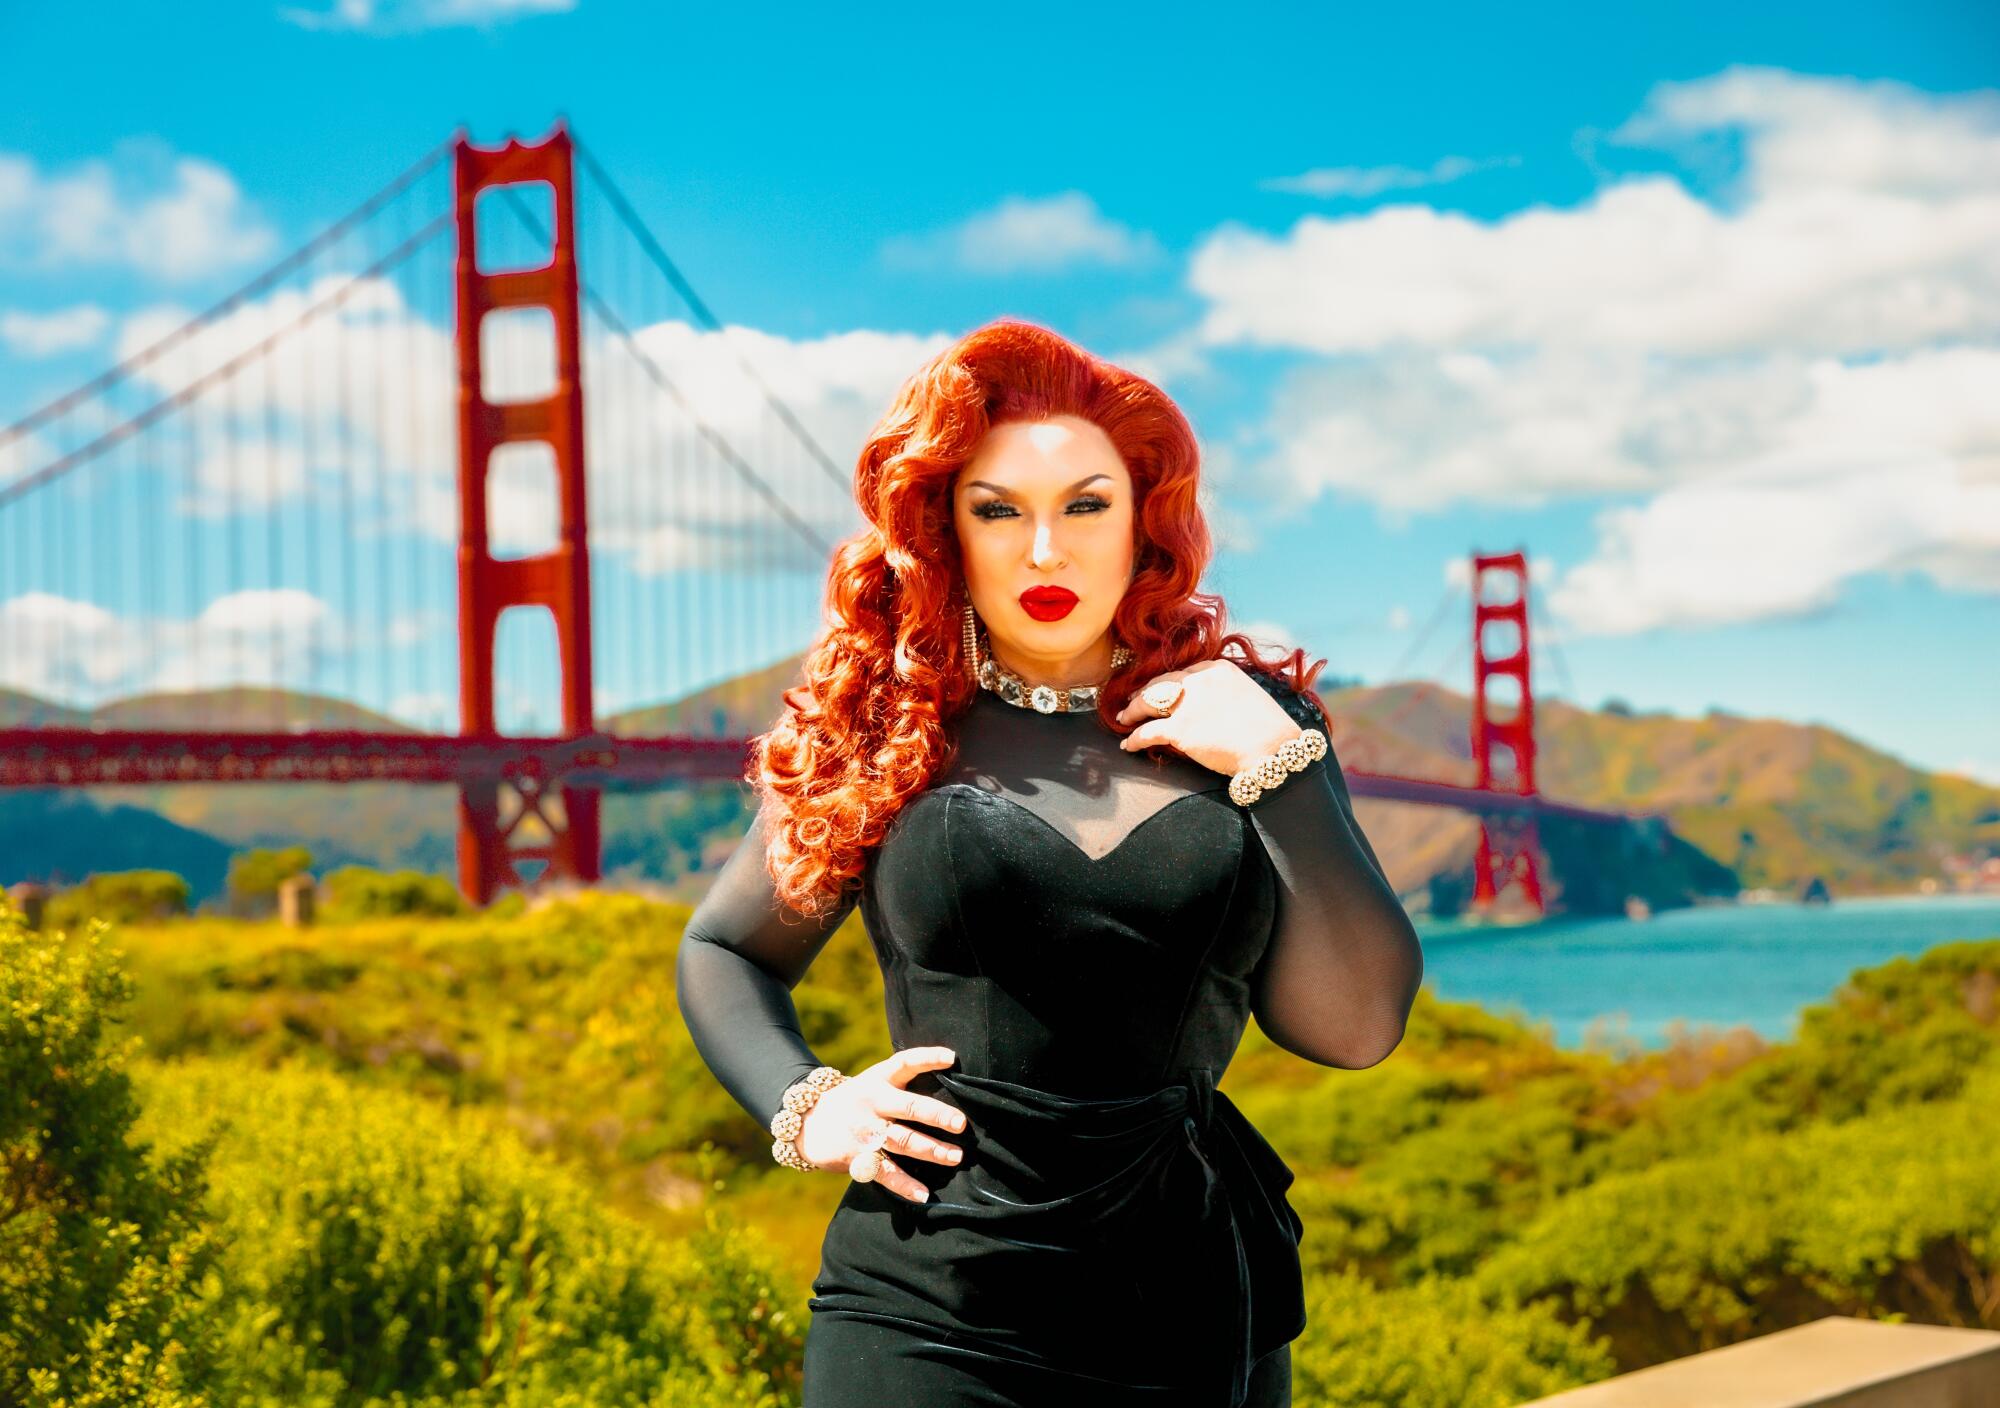 A drag performer stands with the Golden Gate Bridge in the background.